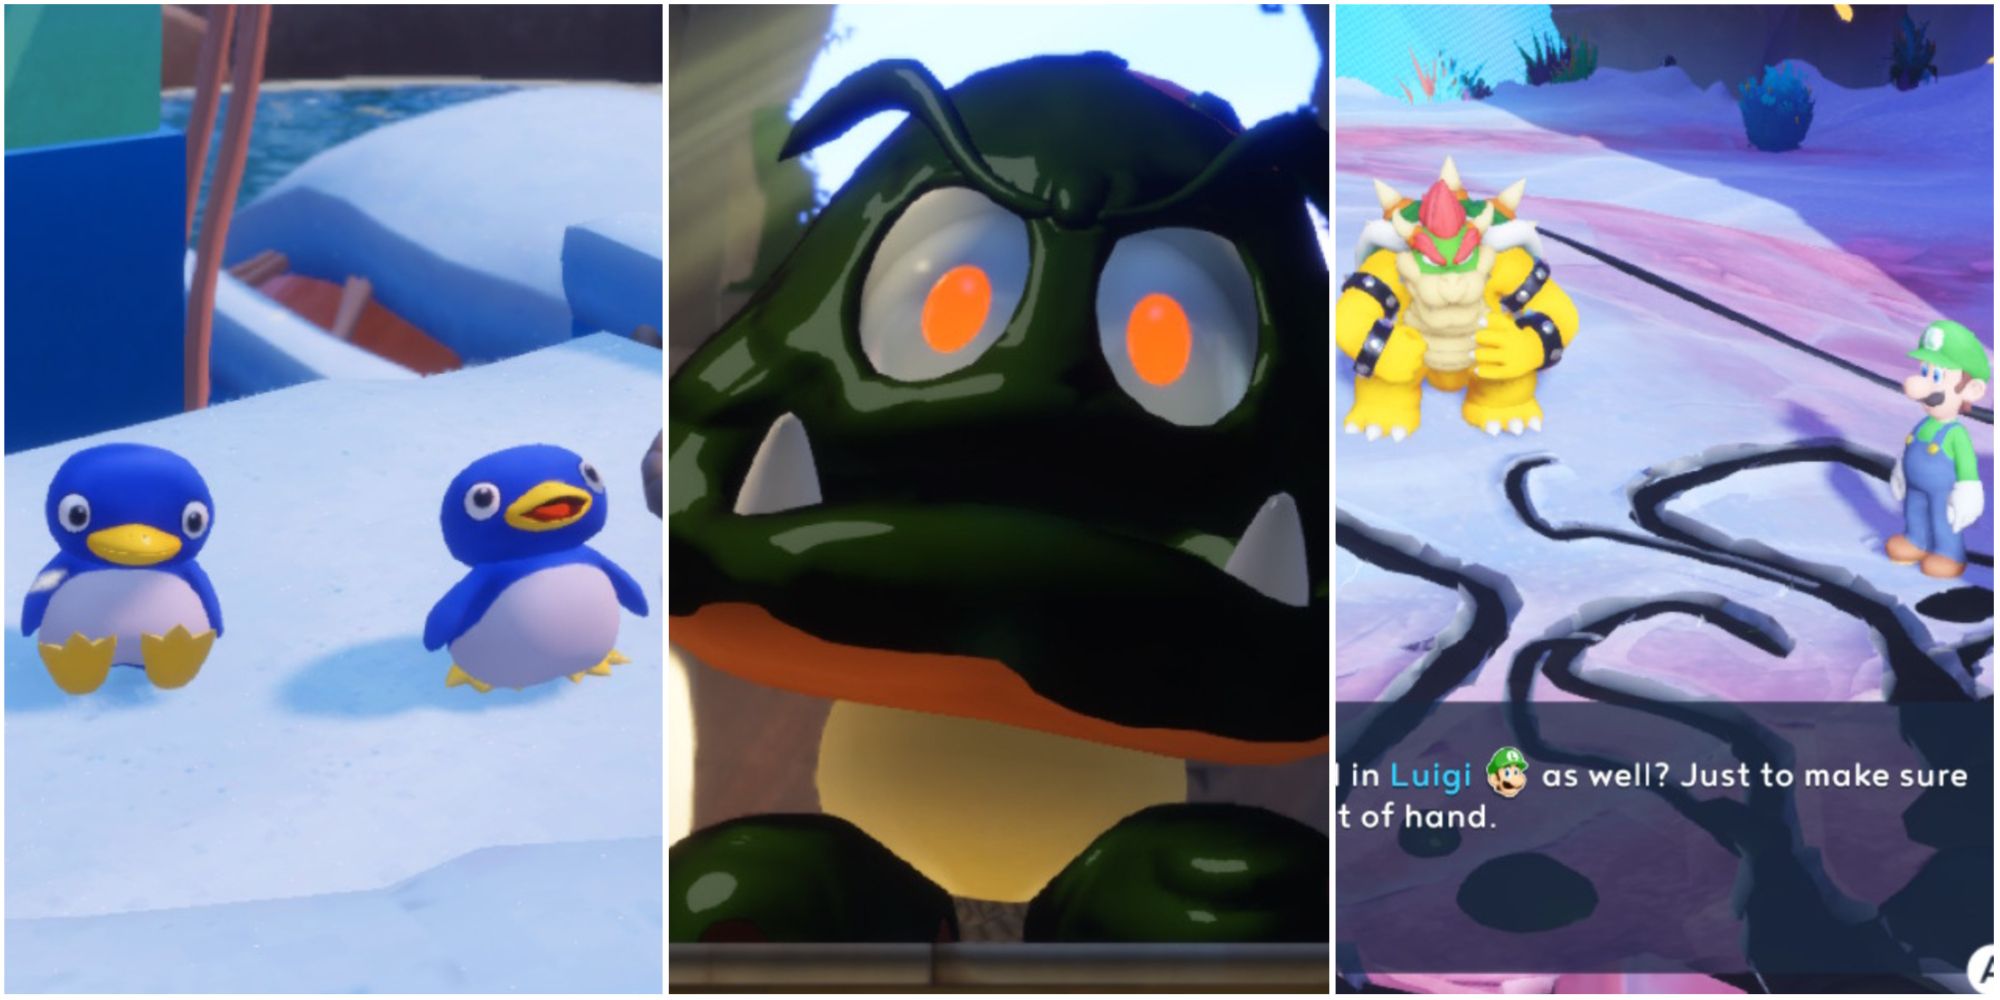 Mario Rabbids Sparks of Hope Side Quests Featured Penguins Giant Goomba Bowser and Luigi